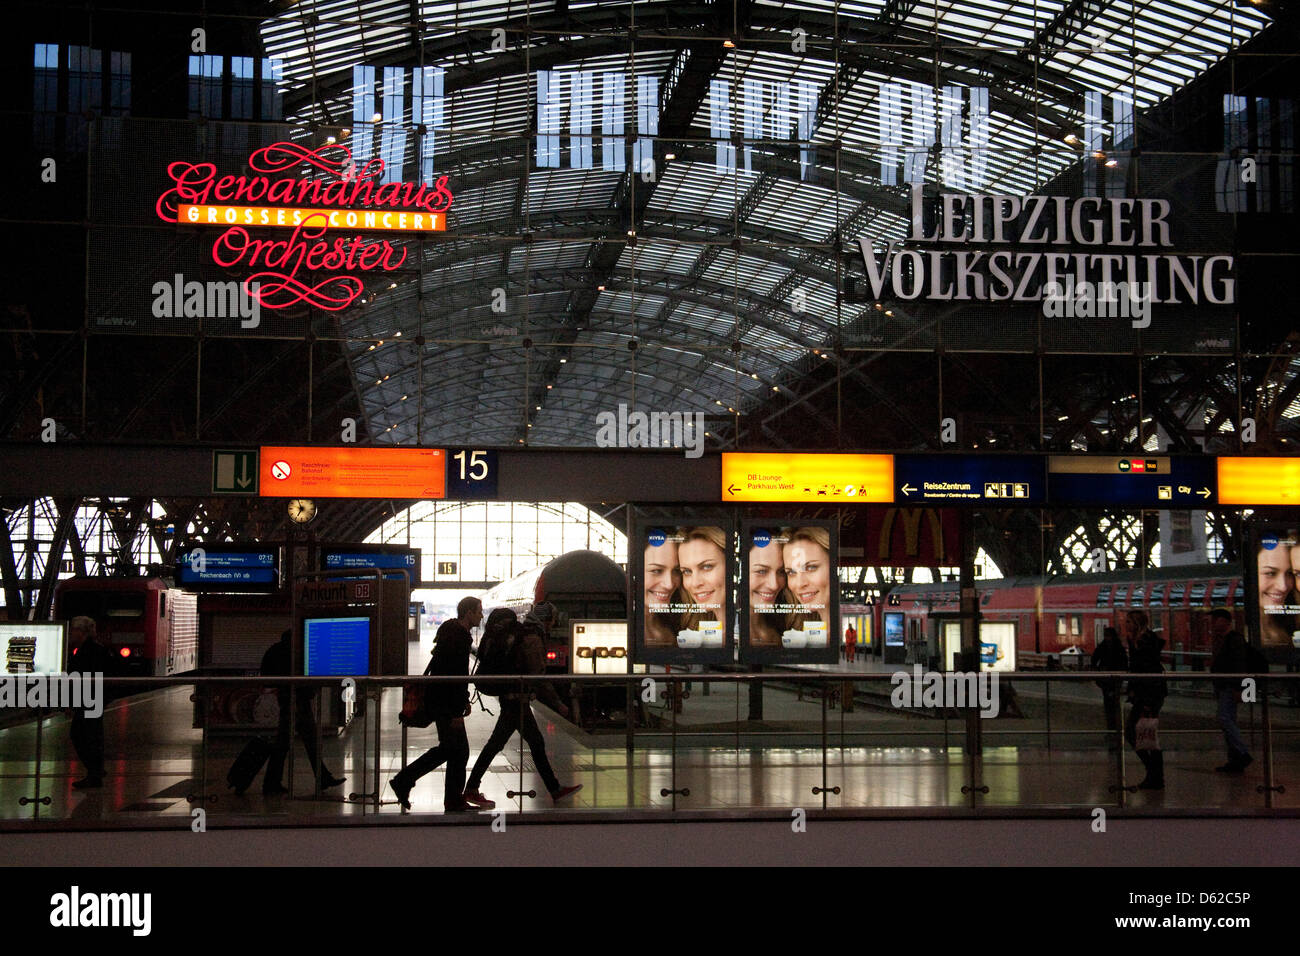 Leipzig, Germany's Central Station is among Europe's largest featuring a shopping mall with hundreds of stores. Stock Photo